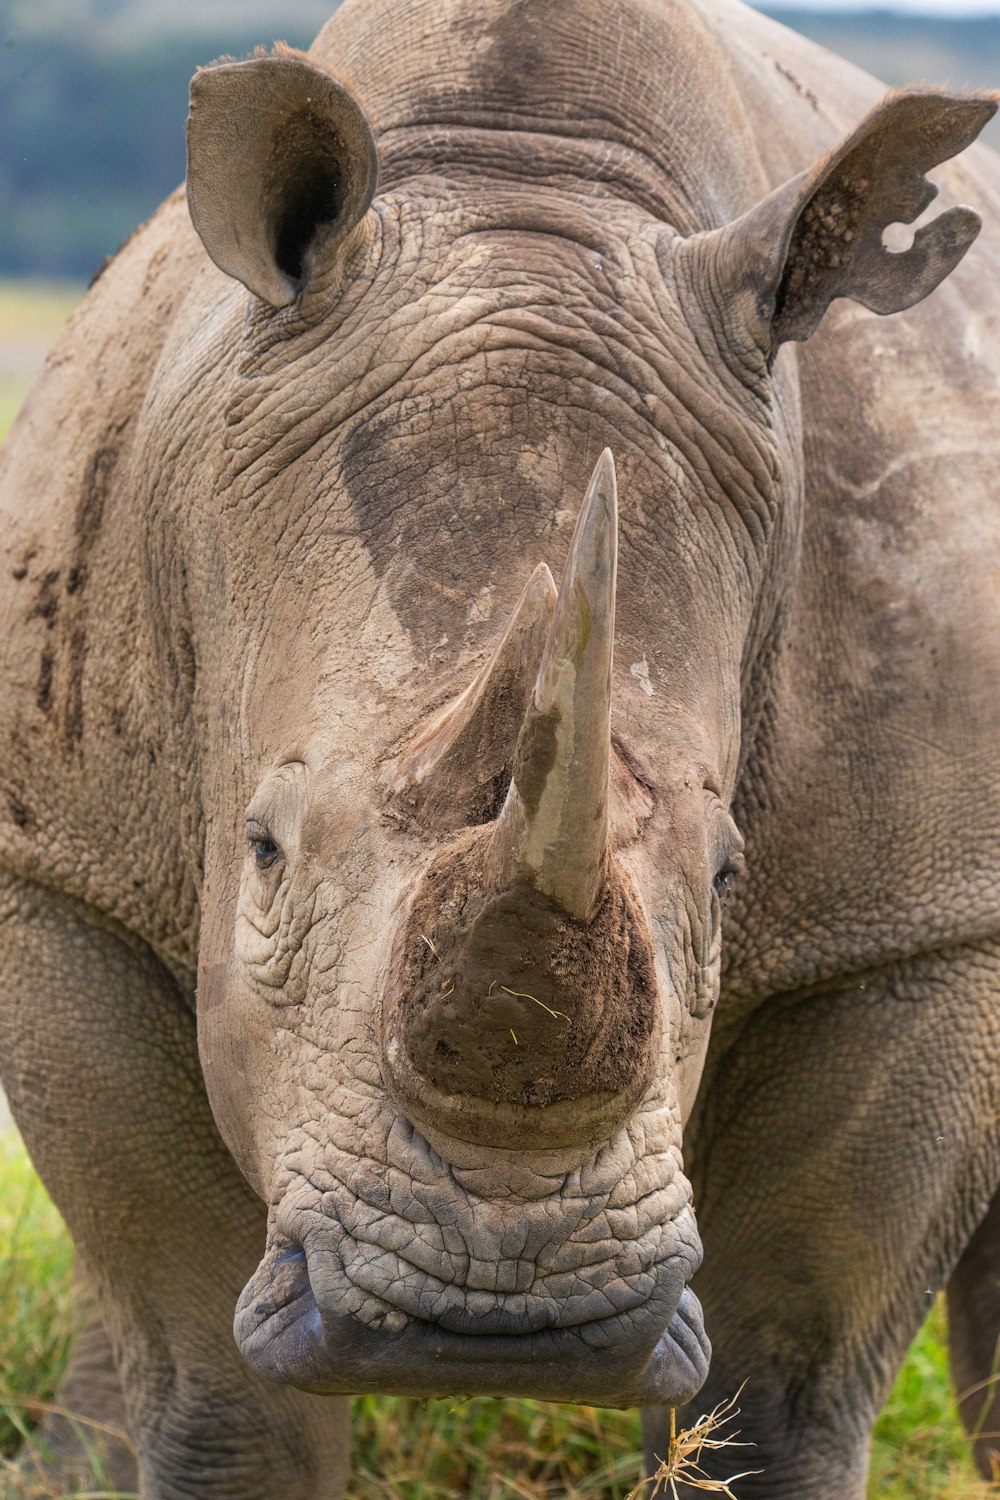 a close up of a rhinoceros eating grass